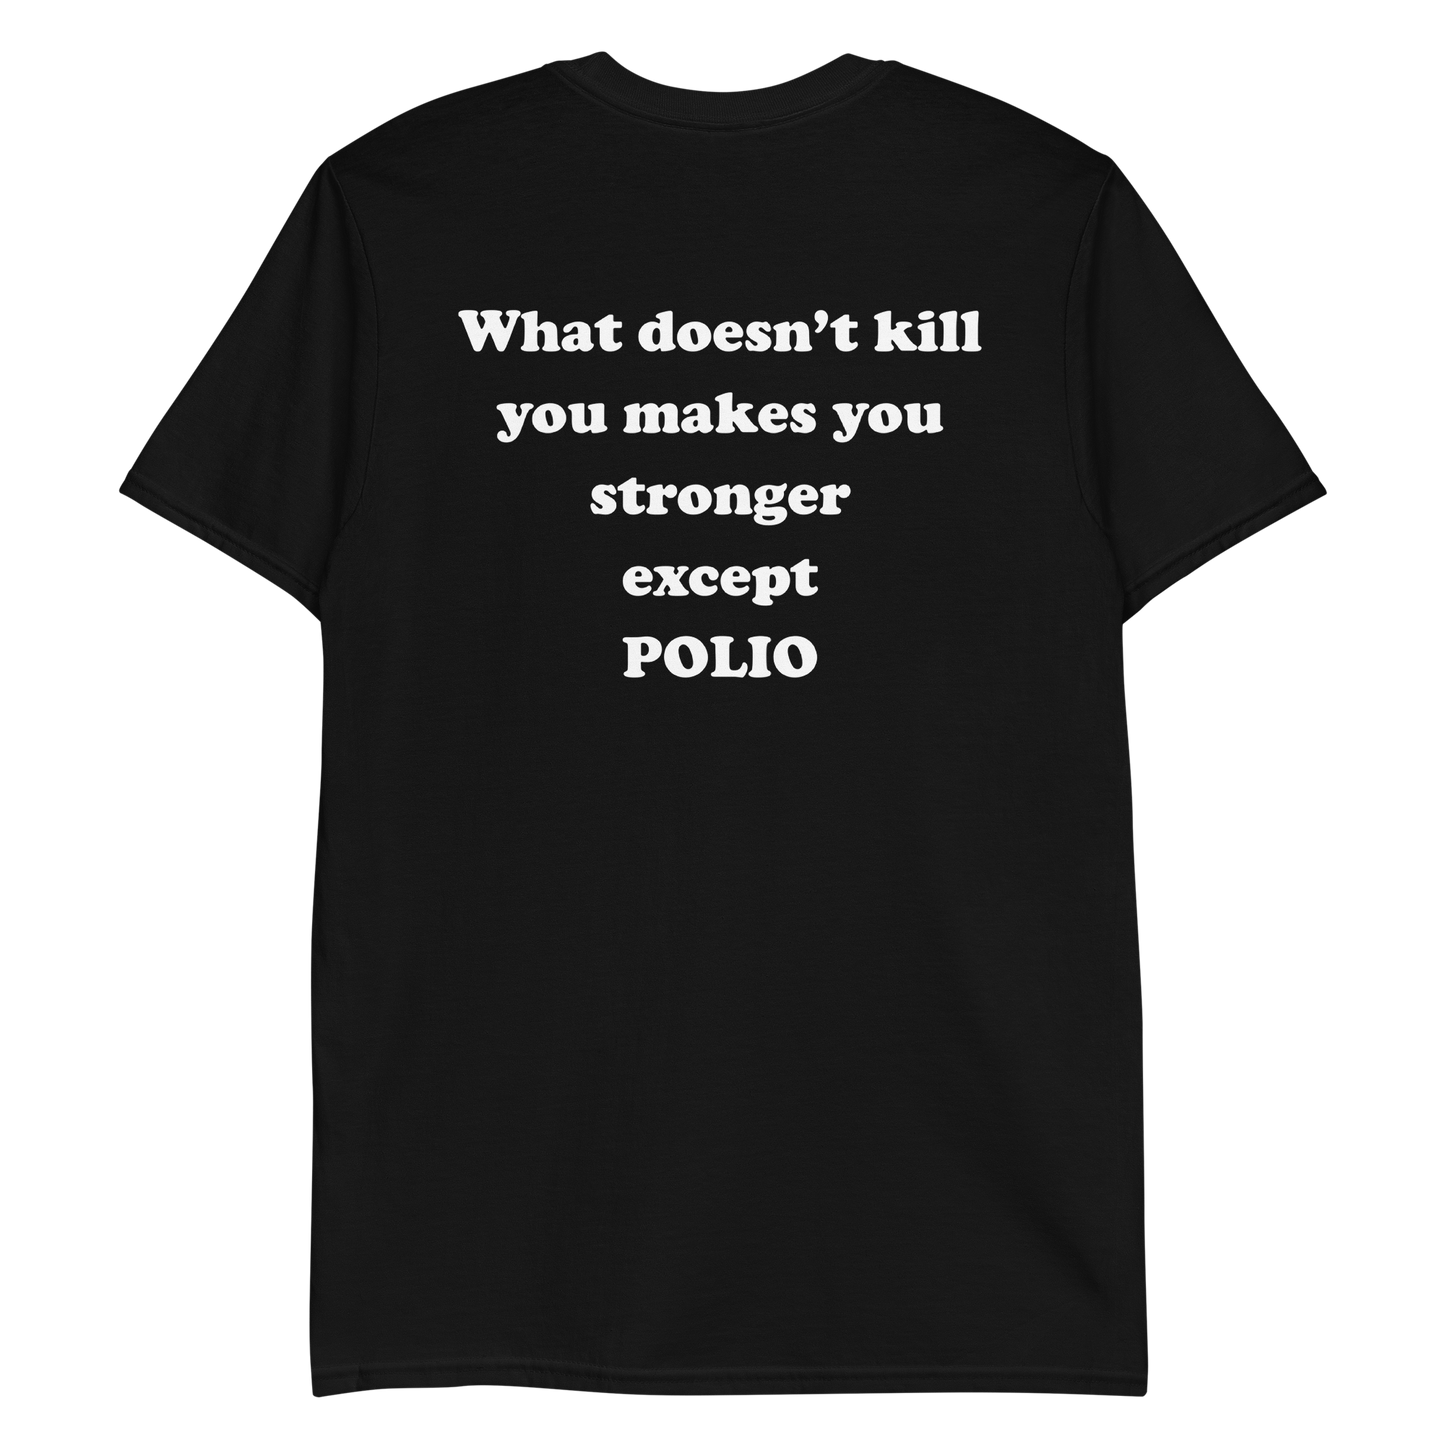 What Doesn't Kill You Makes You Stronger Except Polio.